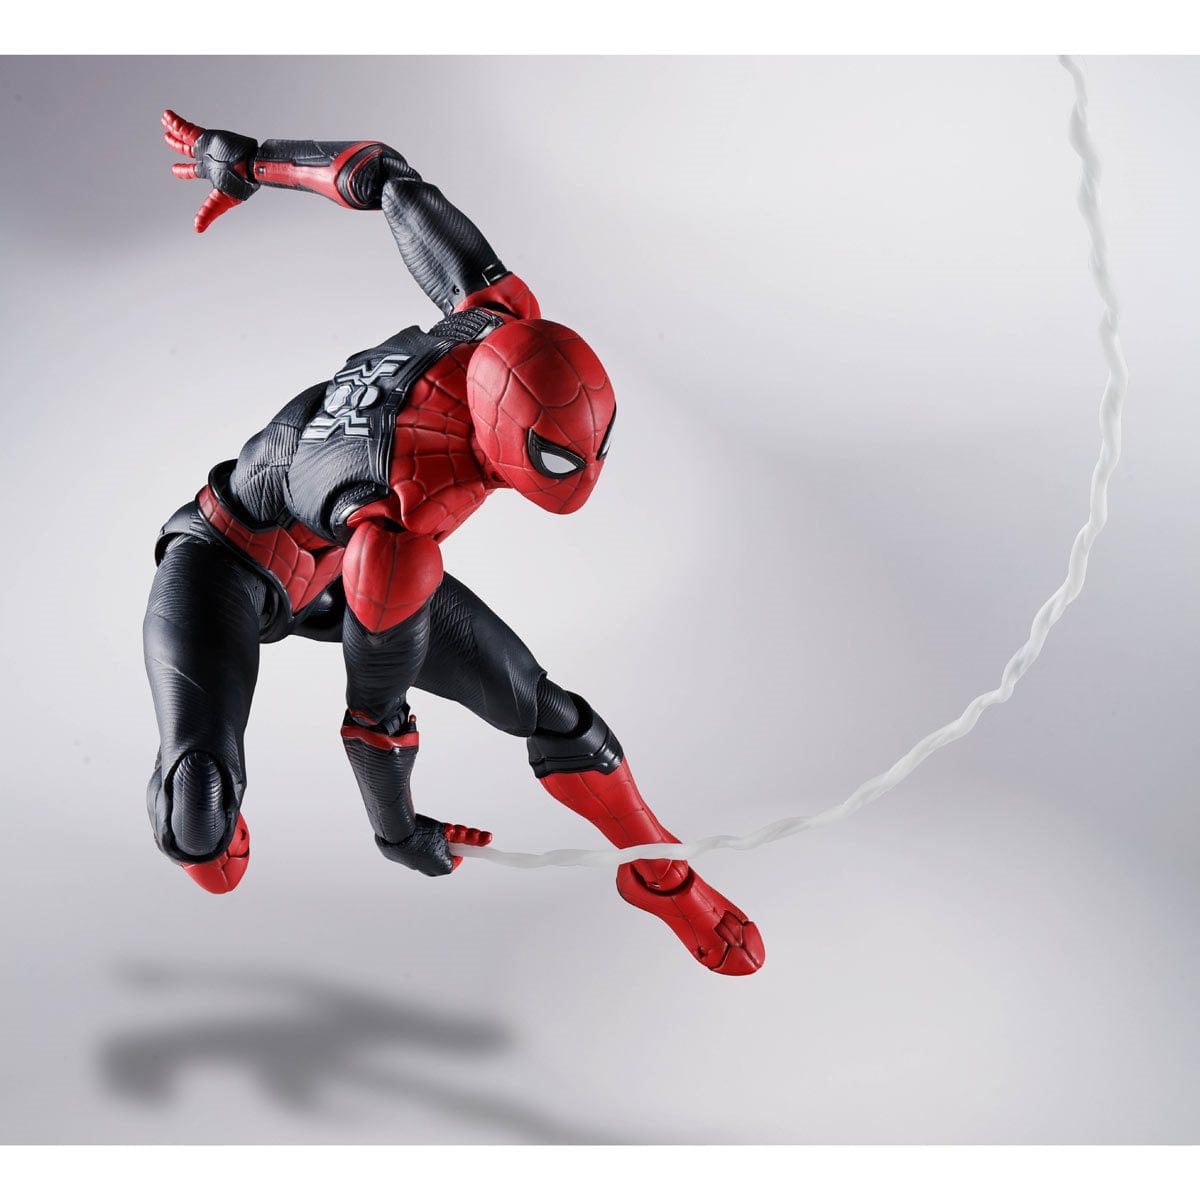 SH Figuarts Spider-Man at World Of Kidz - Low Prices on Action Figures for Kids and collectors of toys